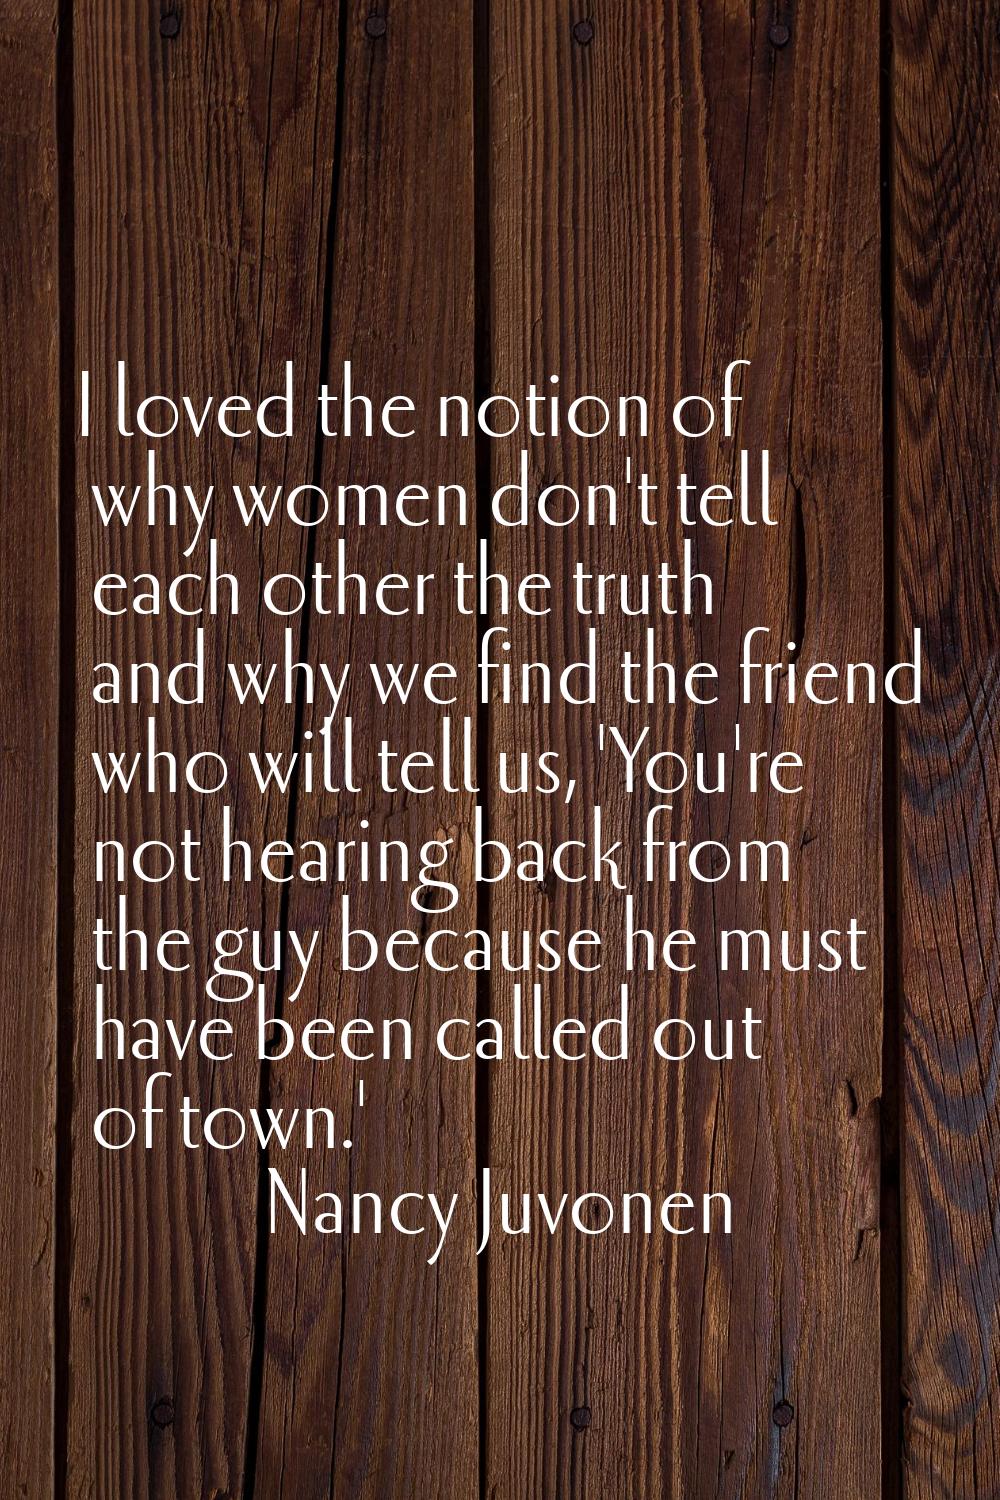 I loved the notion of why women don't tell each other the truth and why we find the friend who will